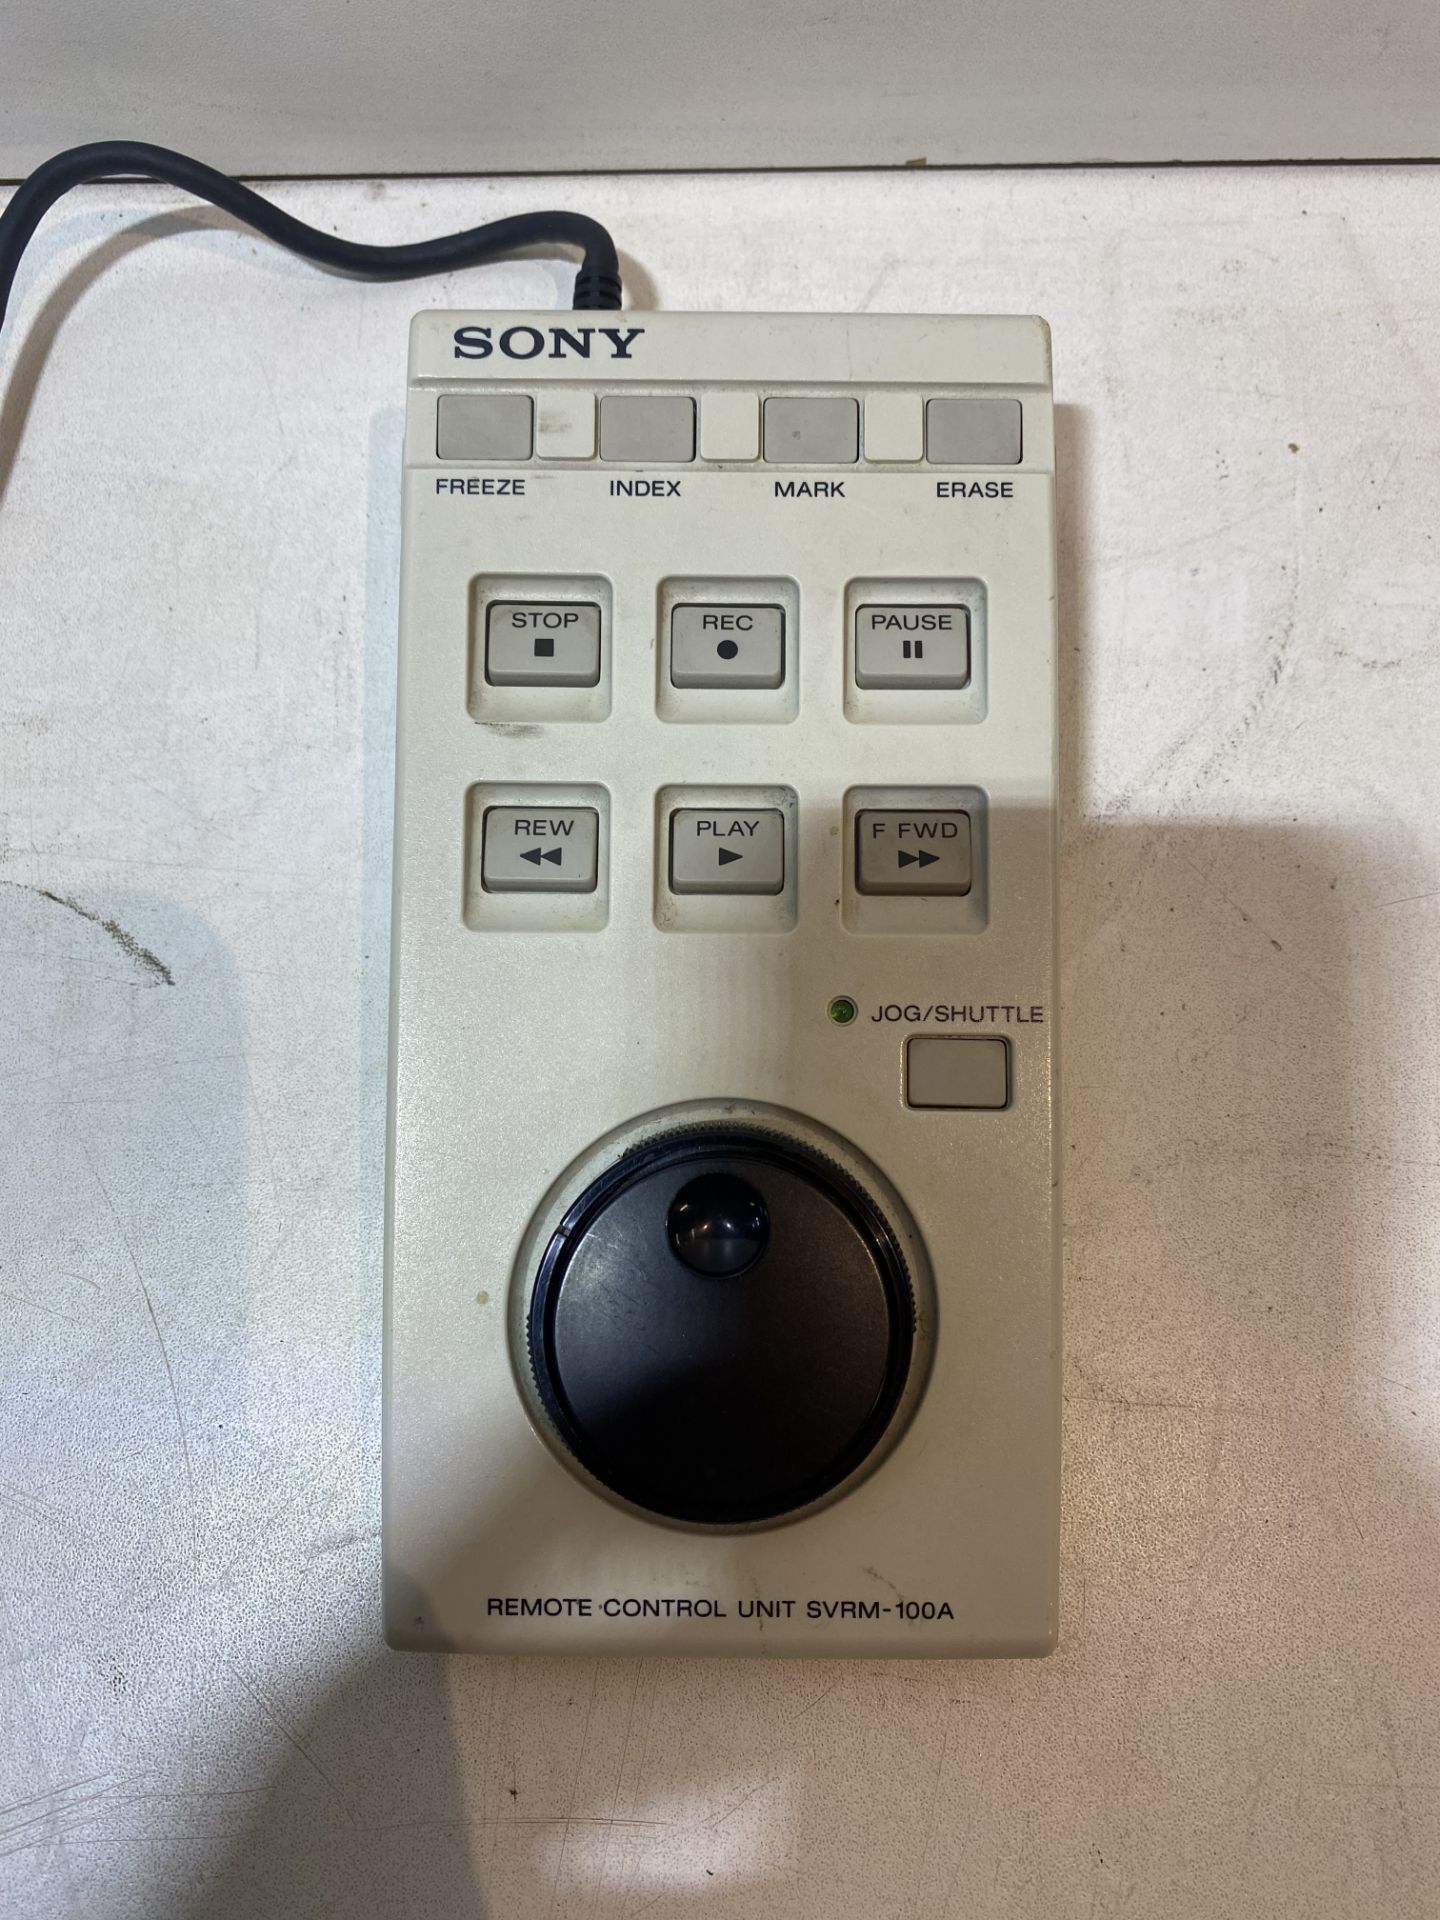 Sony SVRM-100A Wired Remote Control Unit w/ Carry Case - Image 2 of 7